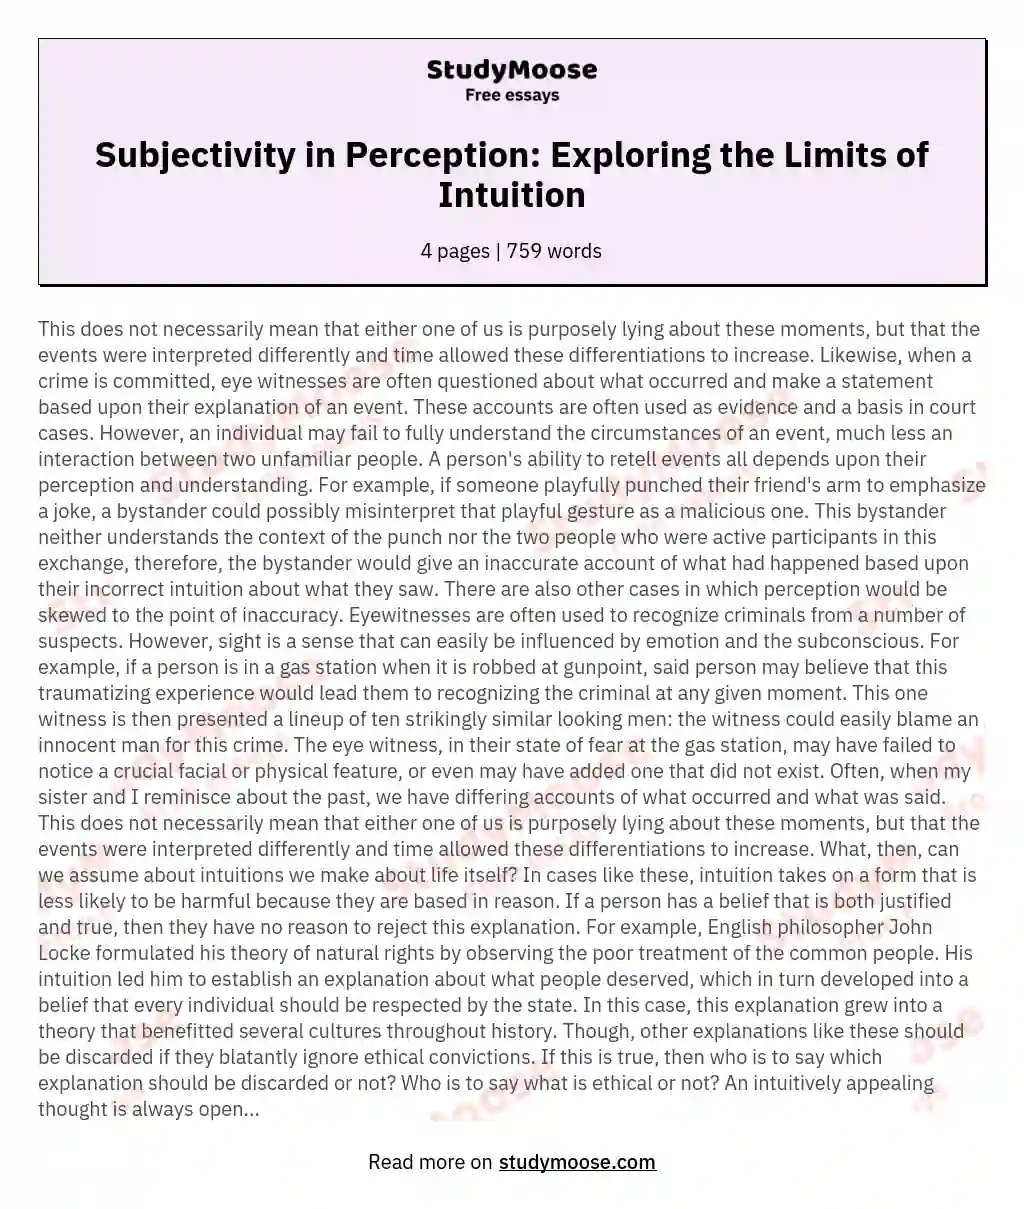 Subjectivity in Perception: Exploring the Limits of Intuition essay